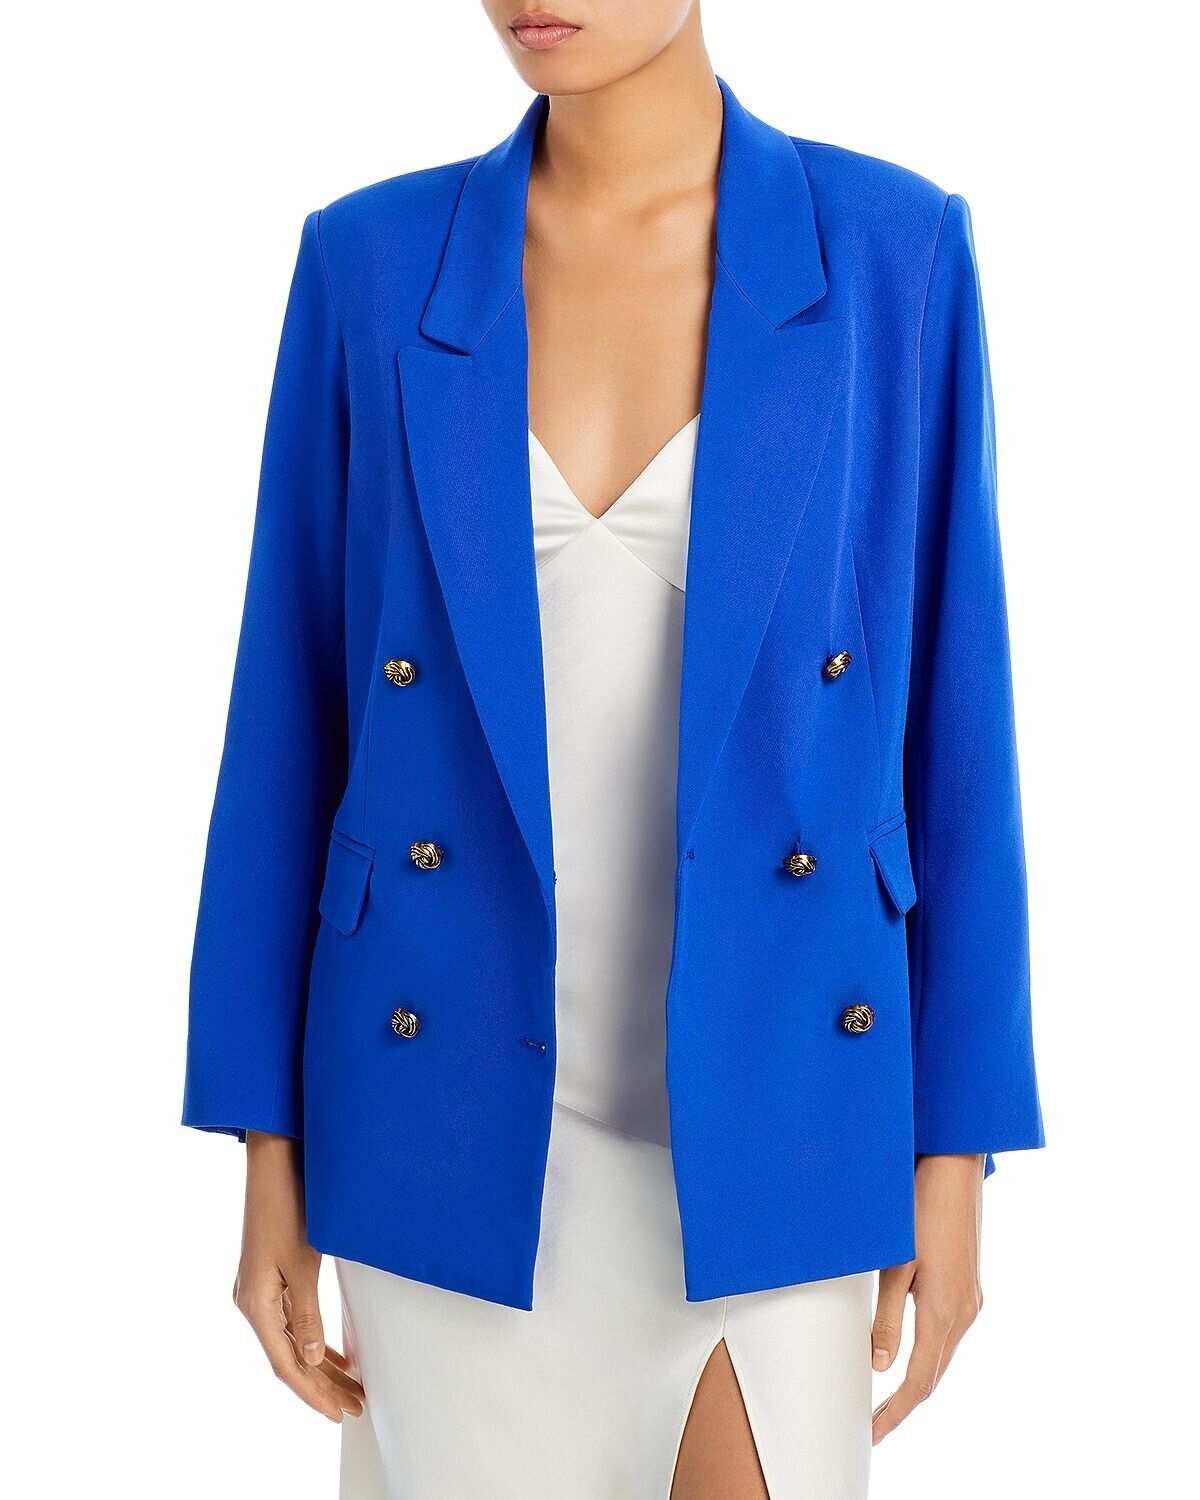 Primary image for Aqua Women's Twill Business Professional Two-Button Blazer Jacket S B4HP